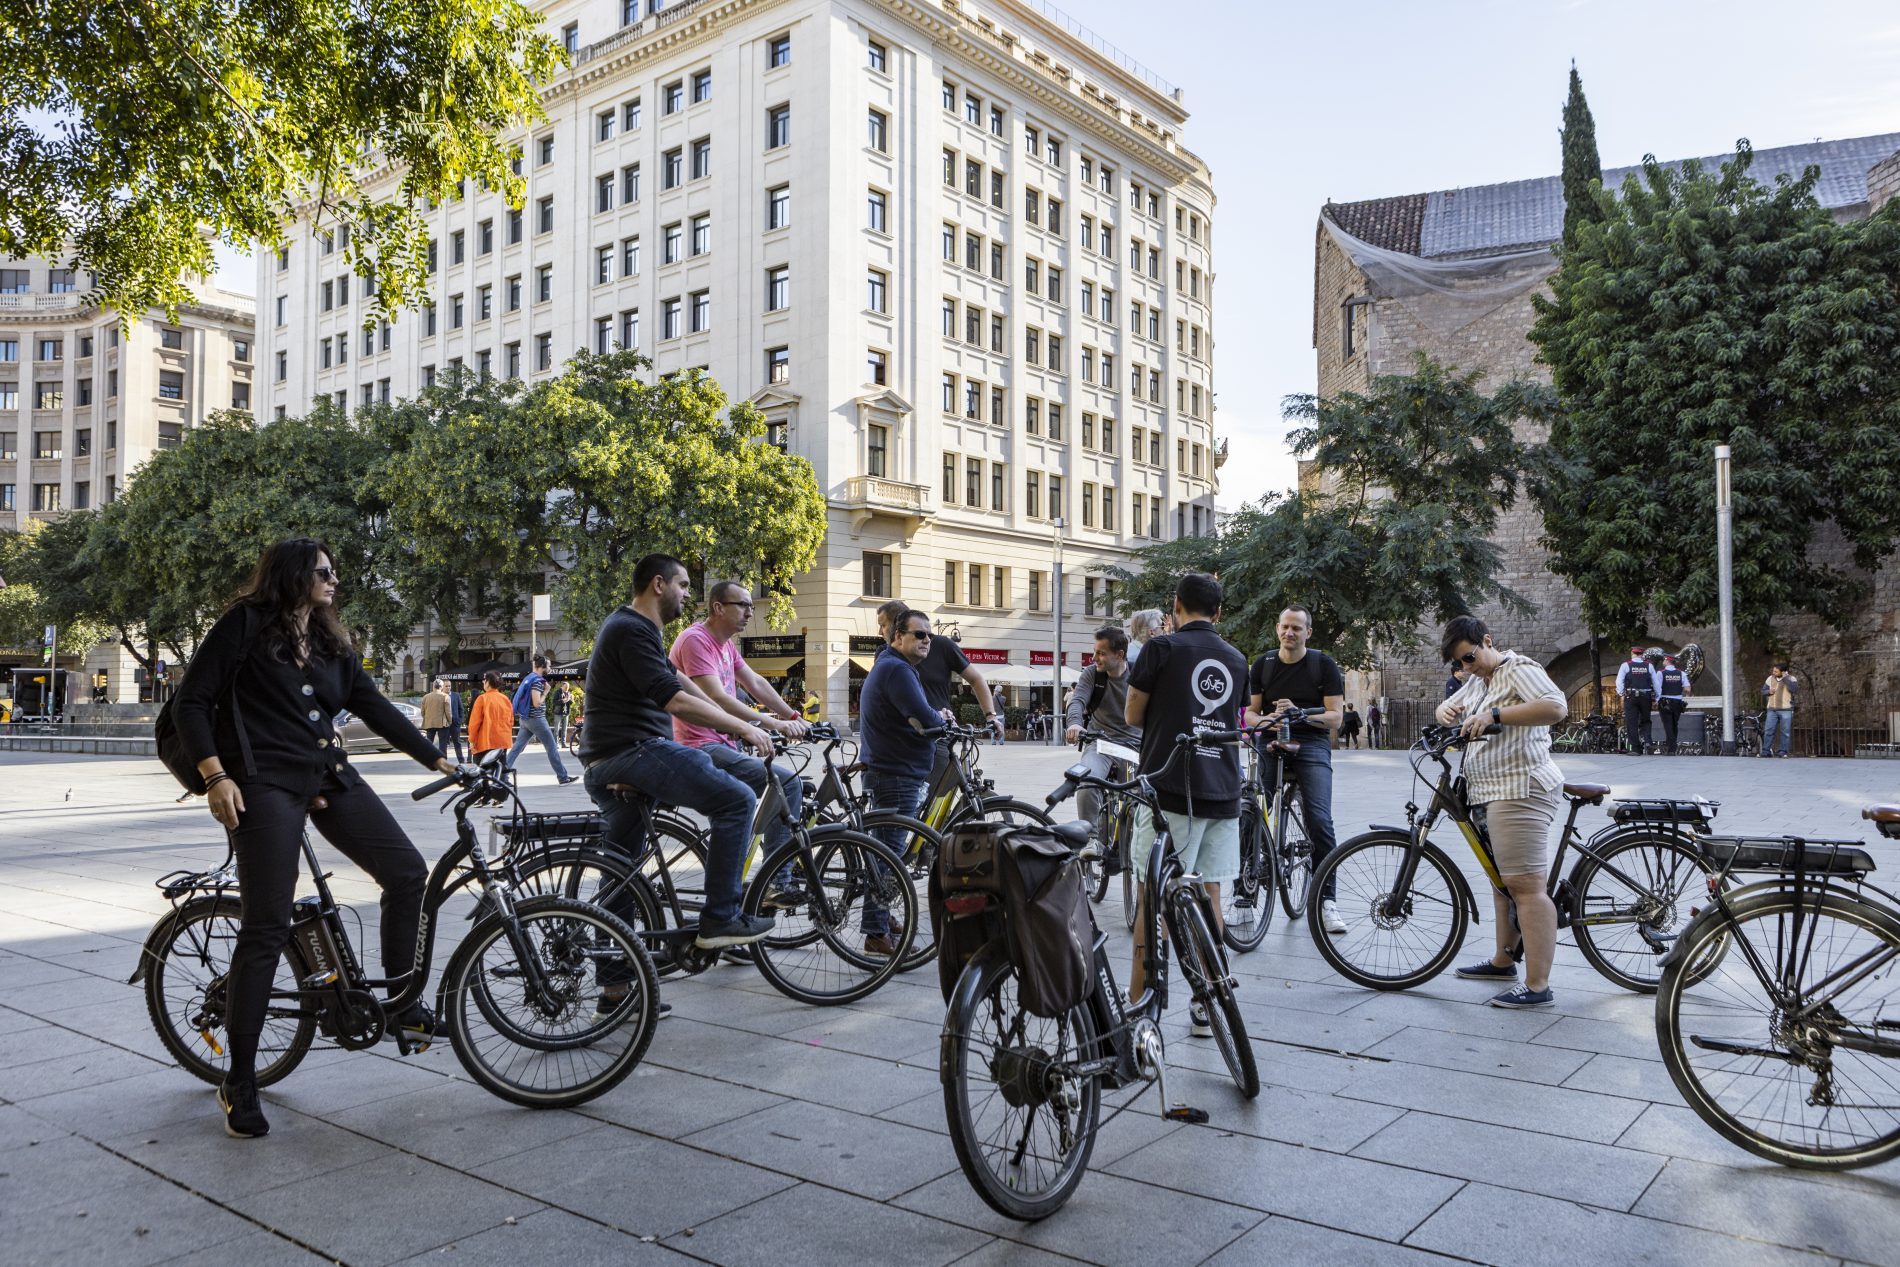 Bike tour as part of incentive events Barcelona